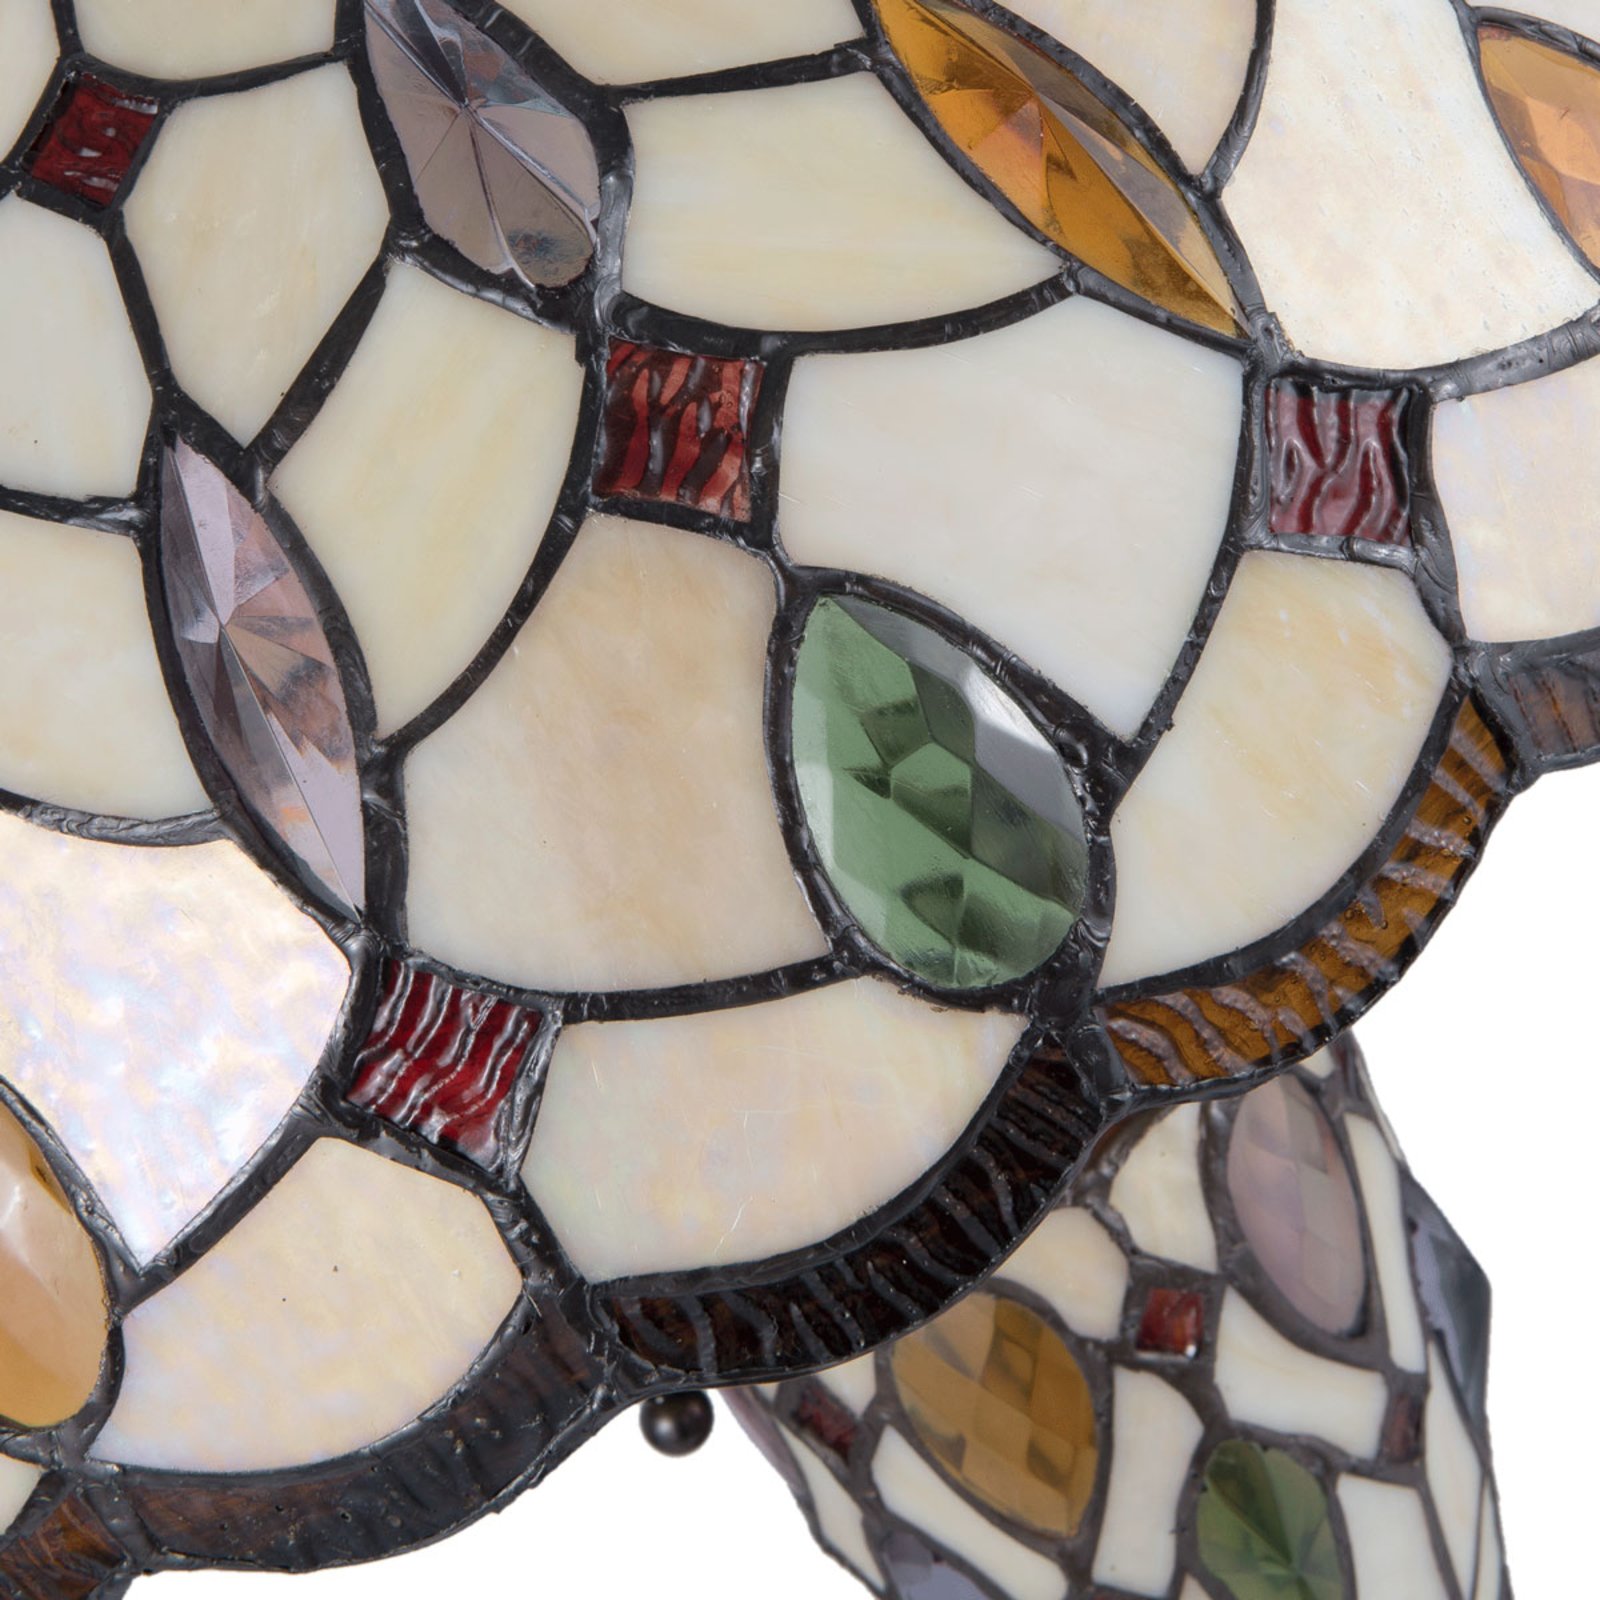 5182 table lamp, colourful Tiffany glass lampshade